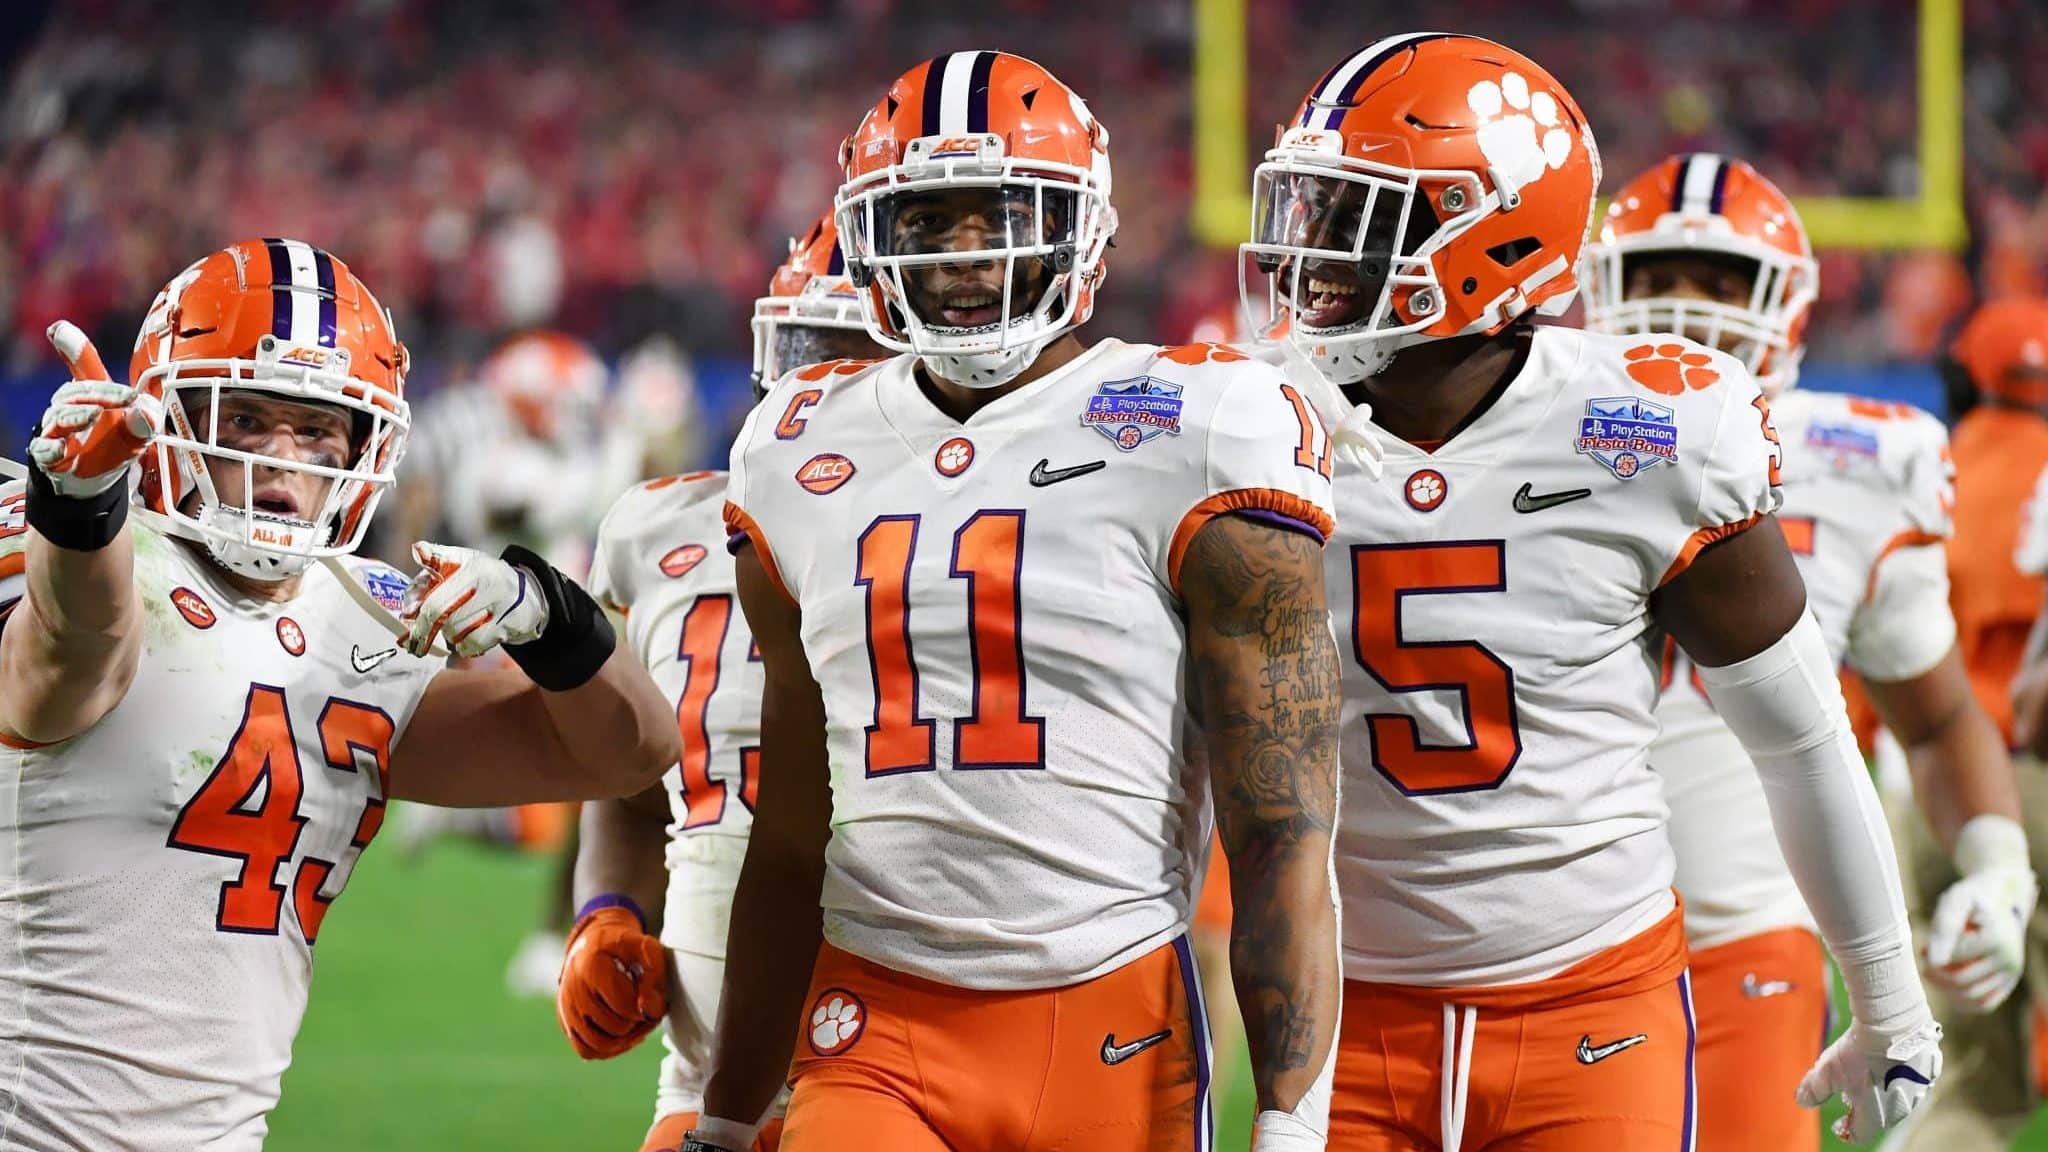 GLENDALE, ARIZONA - DECEMBER 28: Isaiah Simmons #11 of the Clemson Tigers is congratulated by his teammates after an interception against the Ohio State Buckeyes in the second half during the College Football Playoff Semifinal at the PlayStation Fiesta Bowl at State Farm Stadium on December 28, 2019 in Glendale, Arizona.